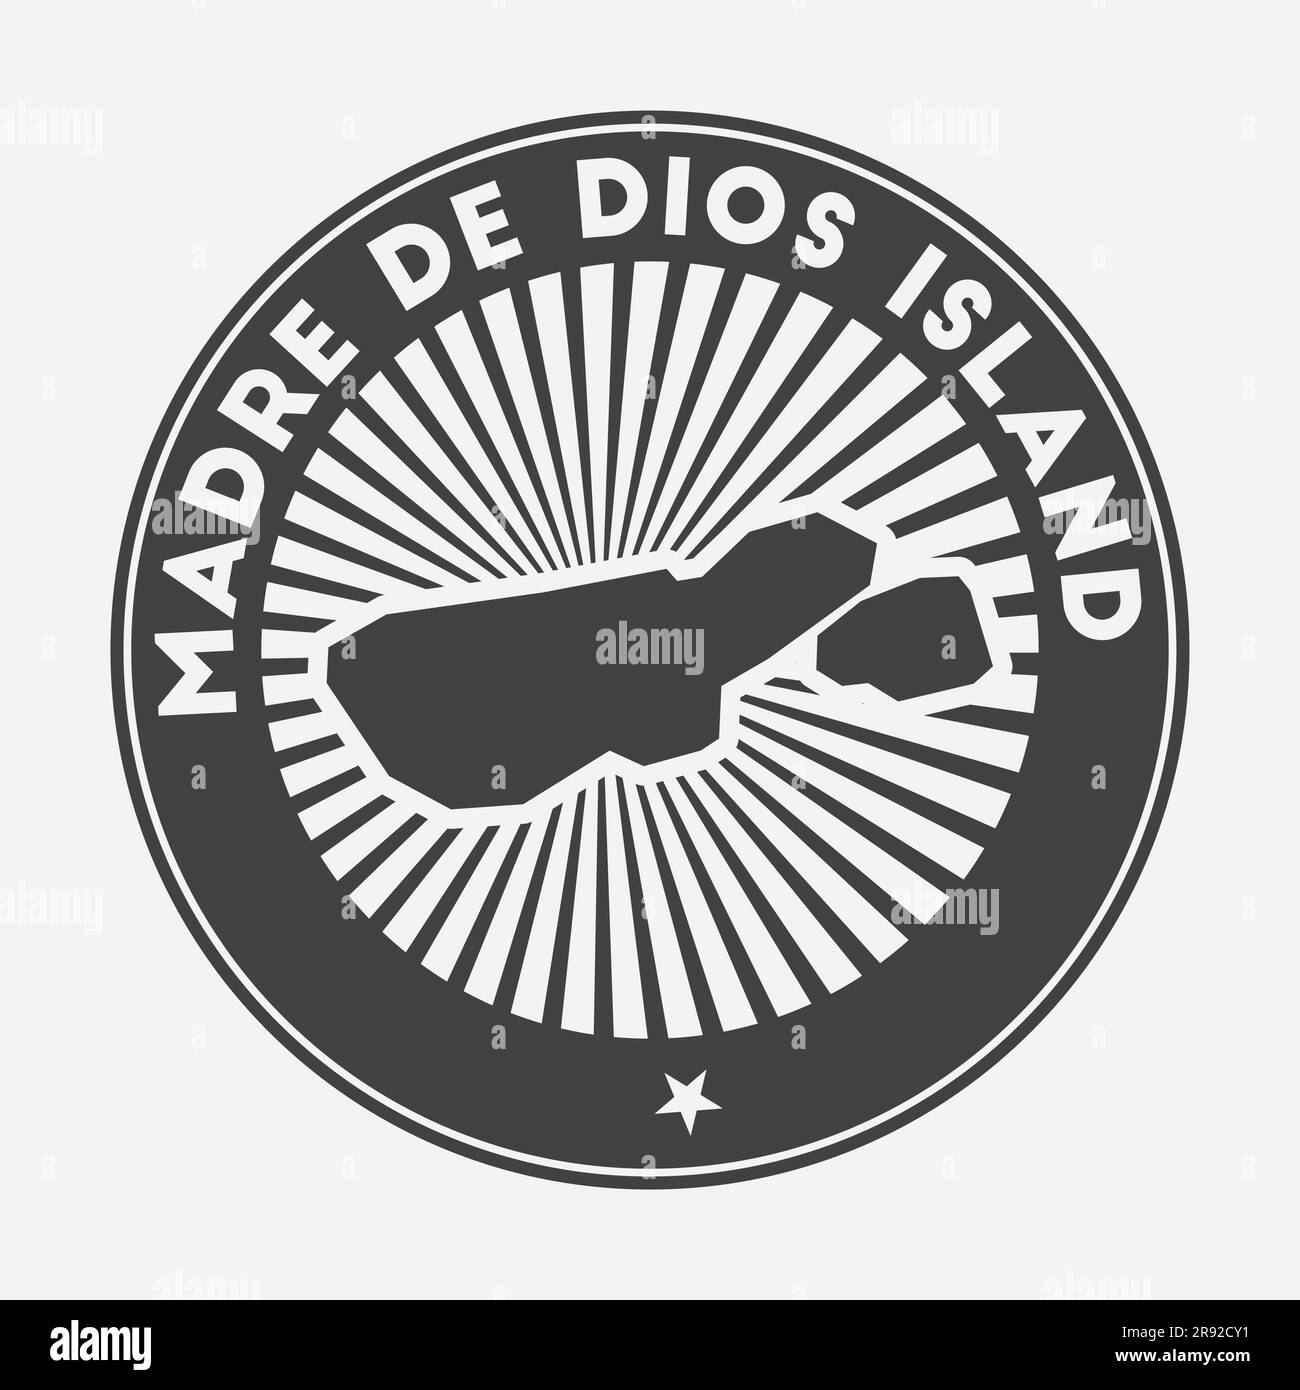 Madre de Dios Island round logo. Vintage travel badge with the circular name and map of island, vector illustration. Stock Vector